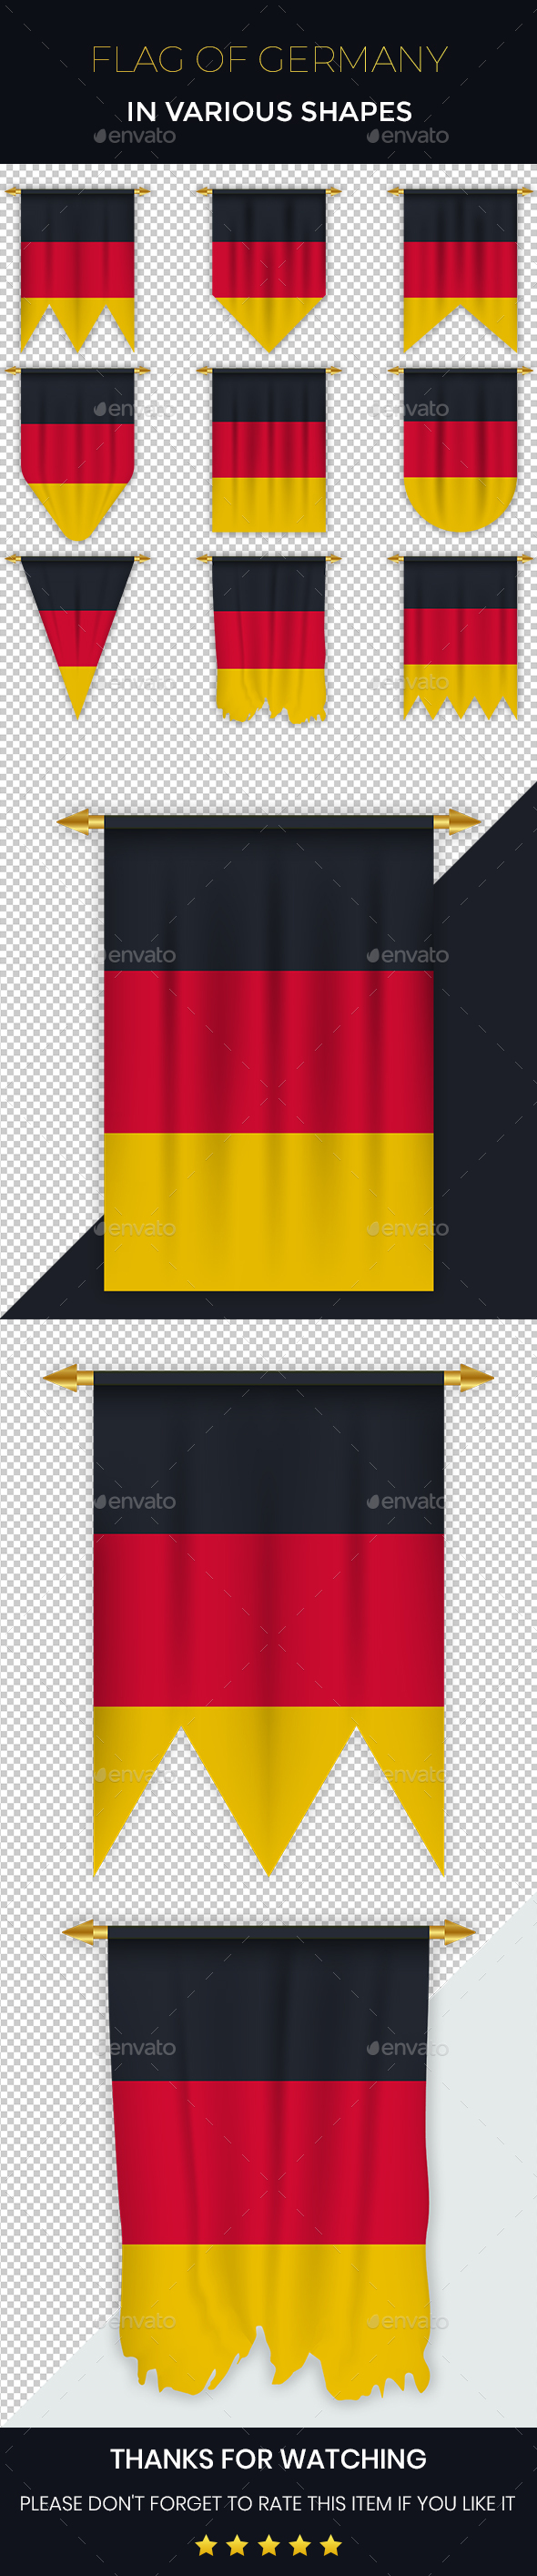 Germany Flag in Various Shapes